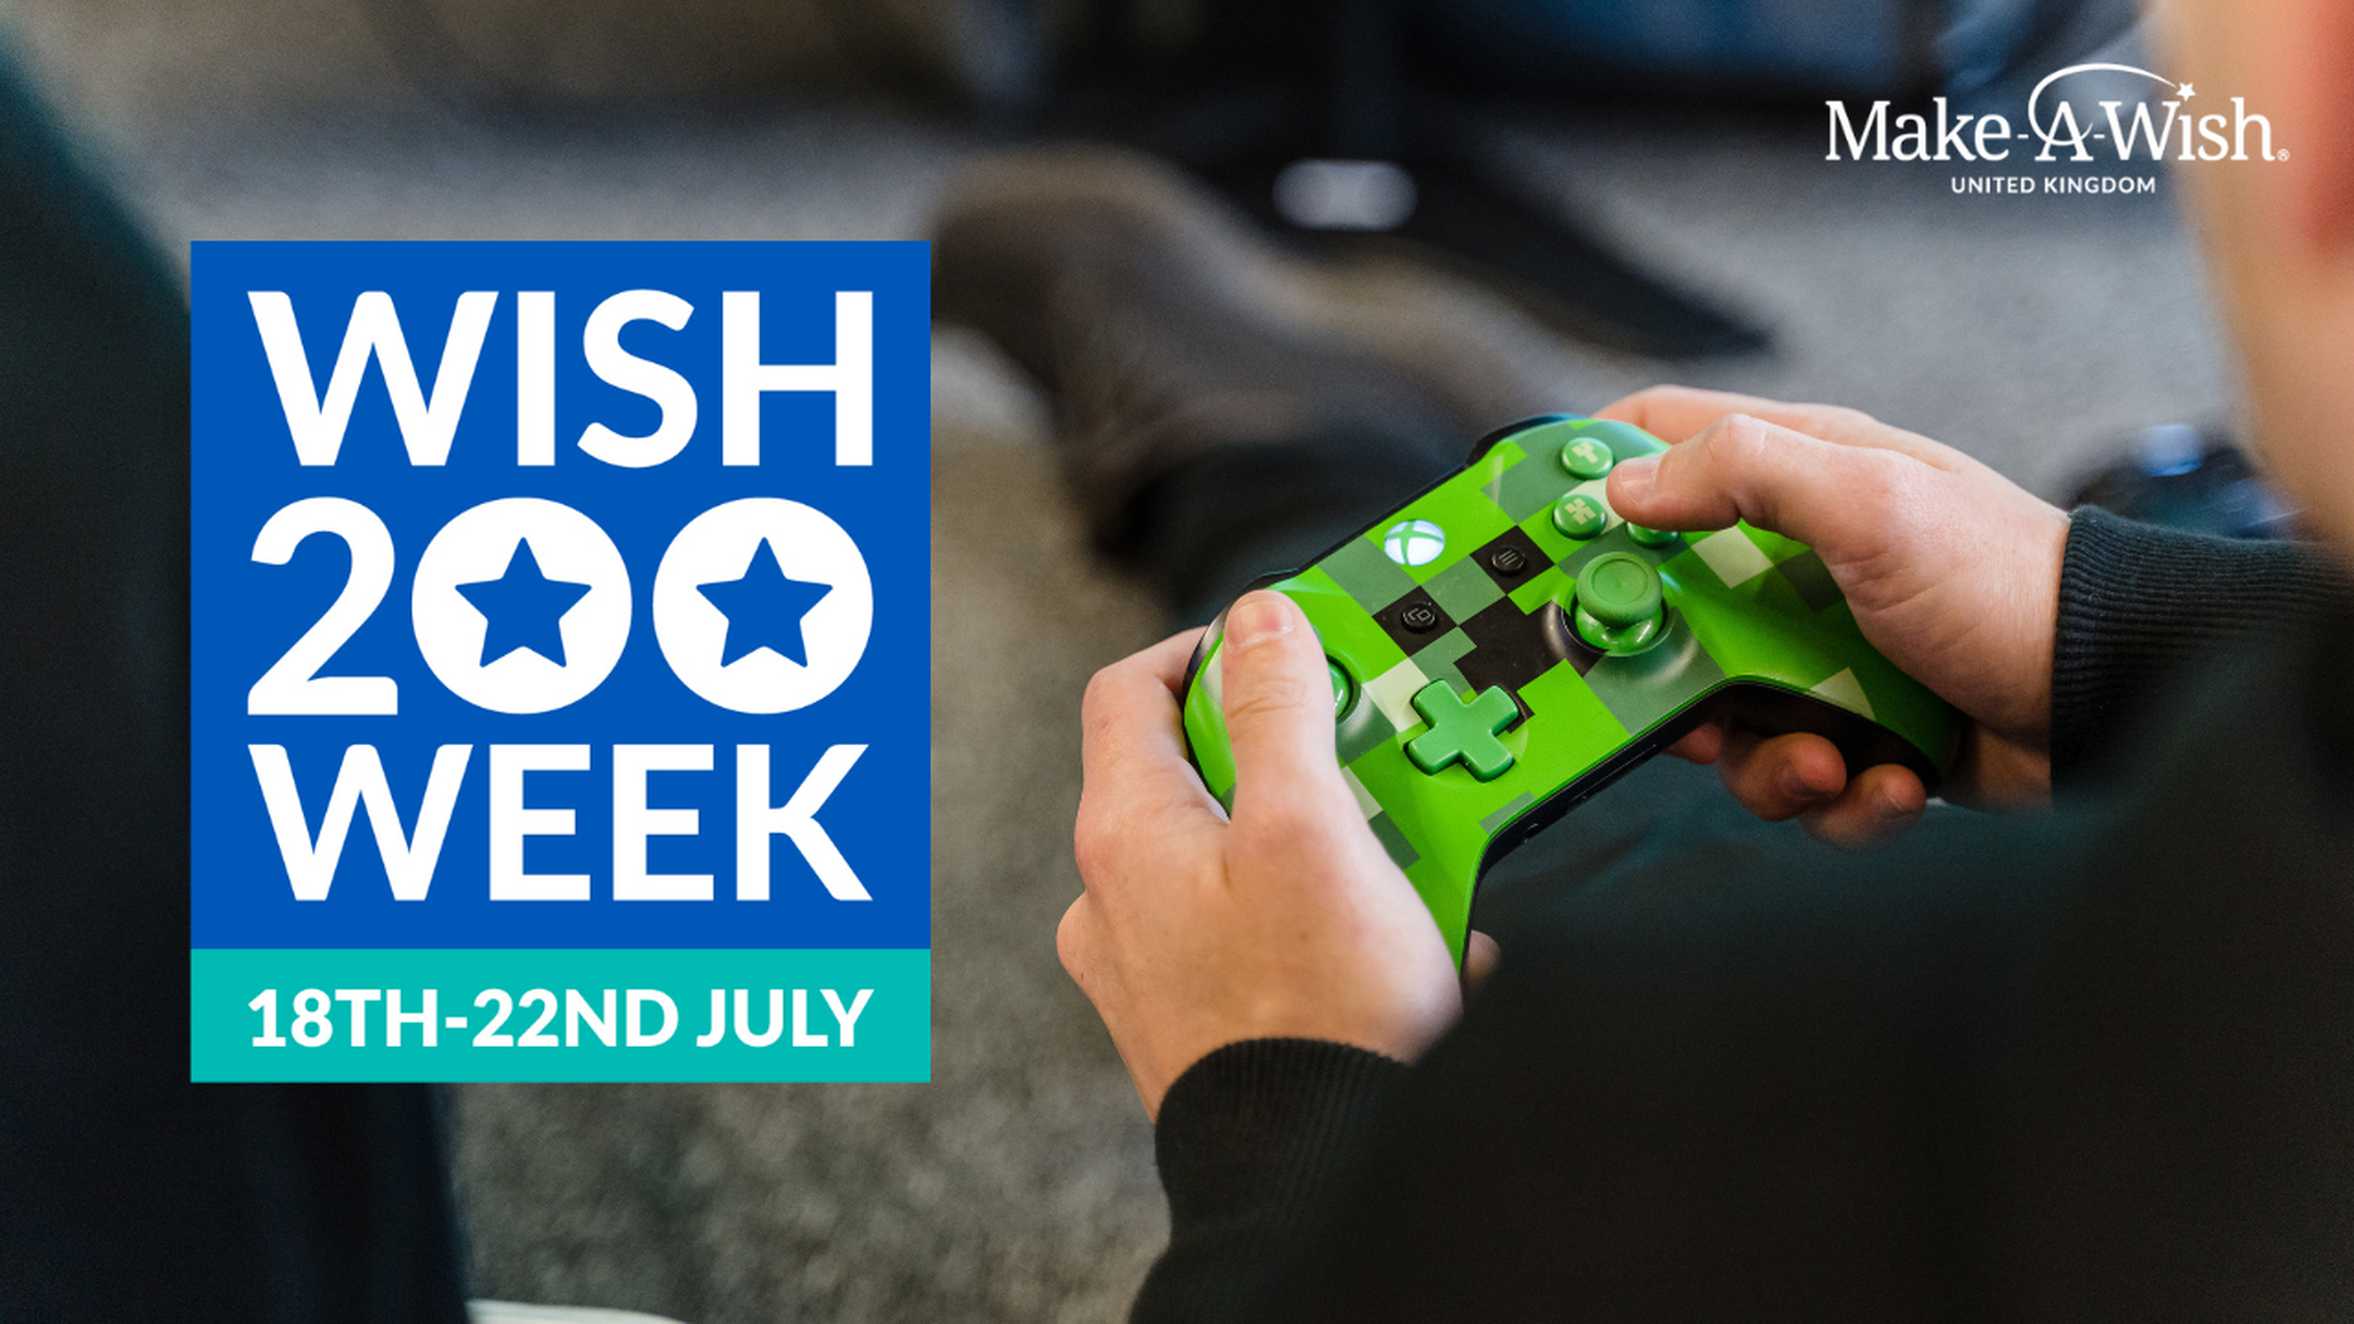 Image for Games studios and streamers raise £400k for Make-A-Wish UK